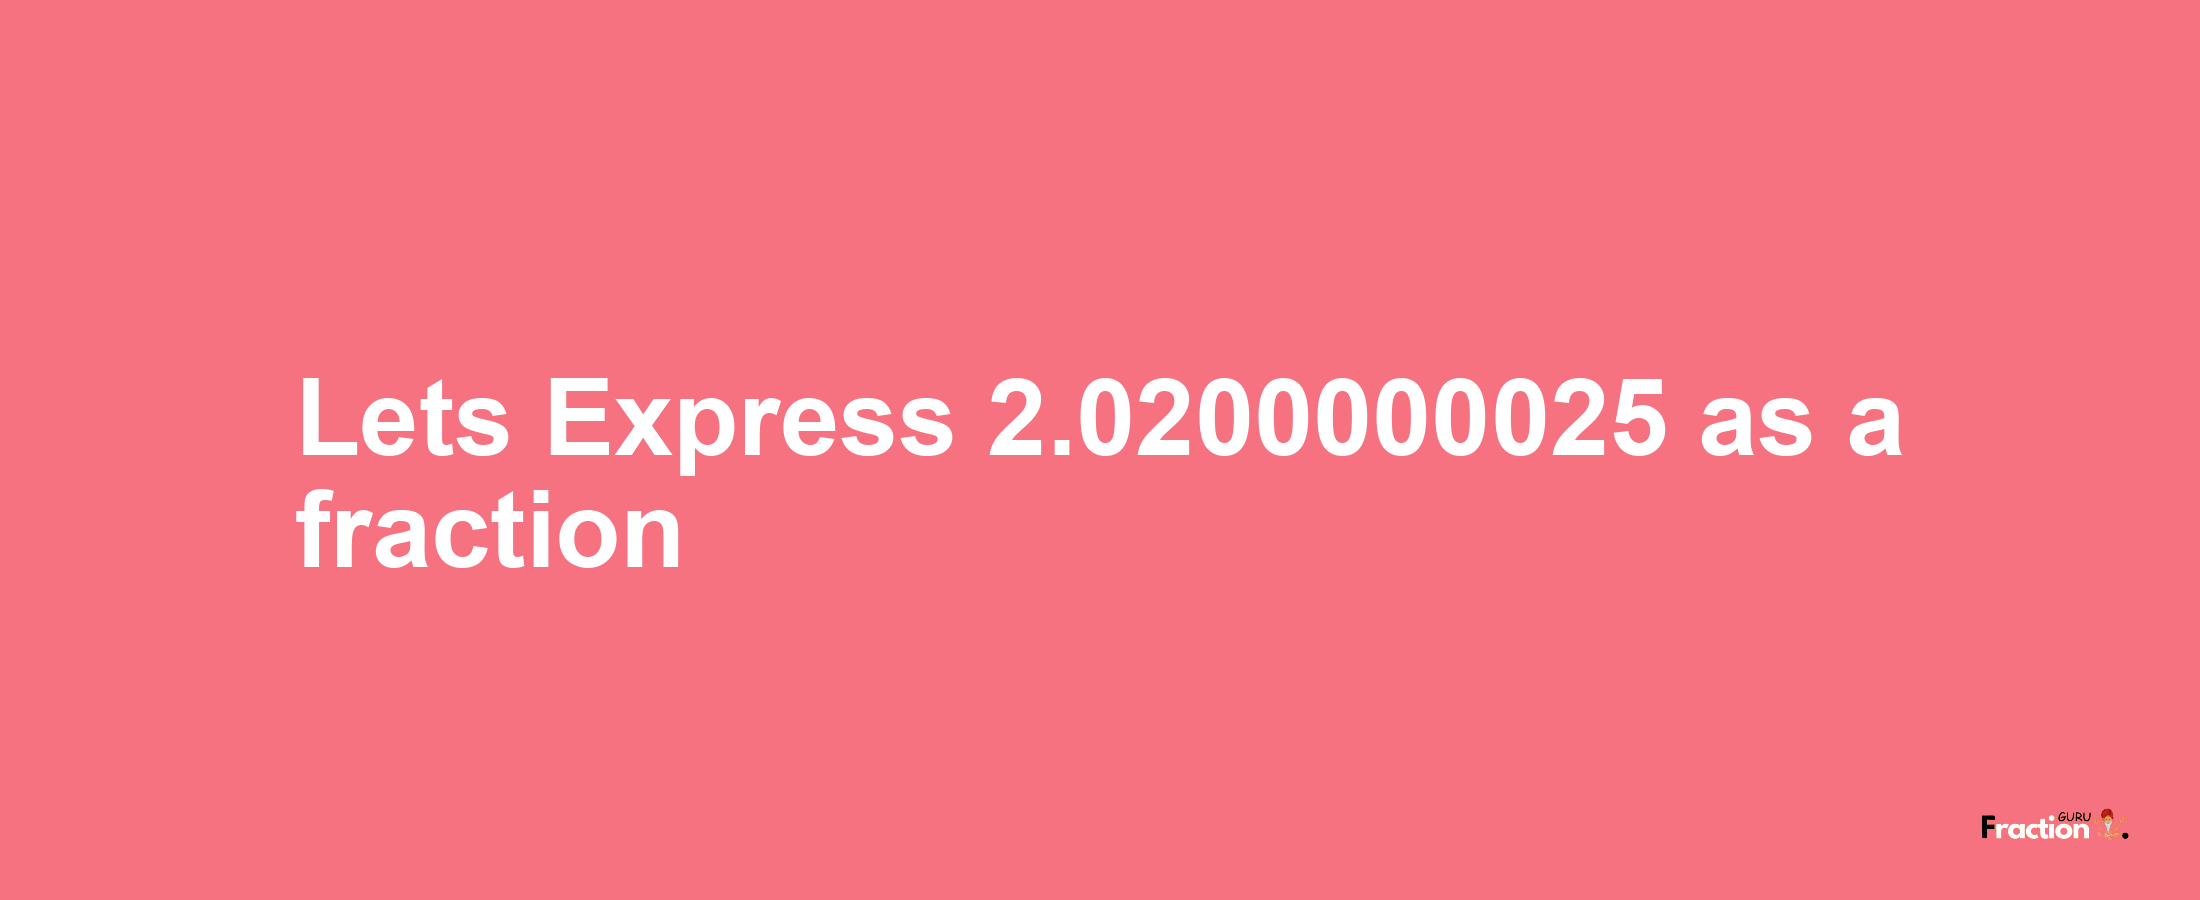 Lets Express 2.0200000025 as afraction